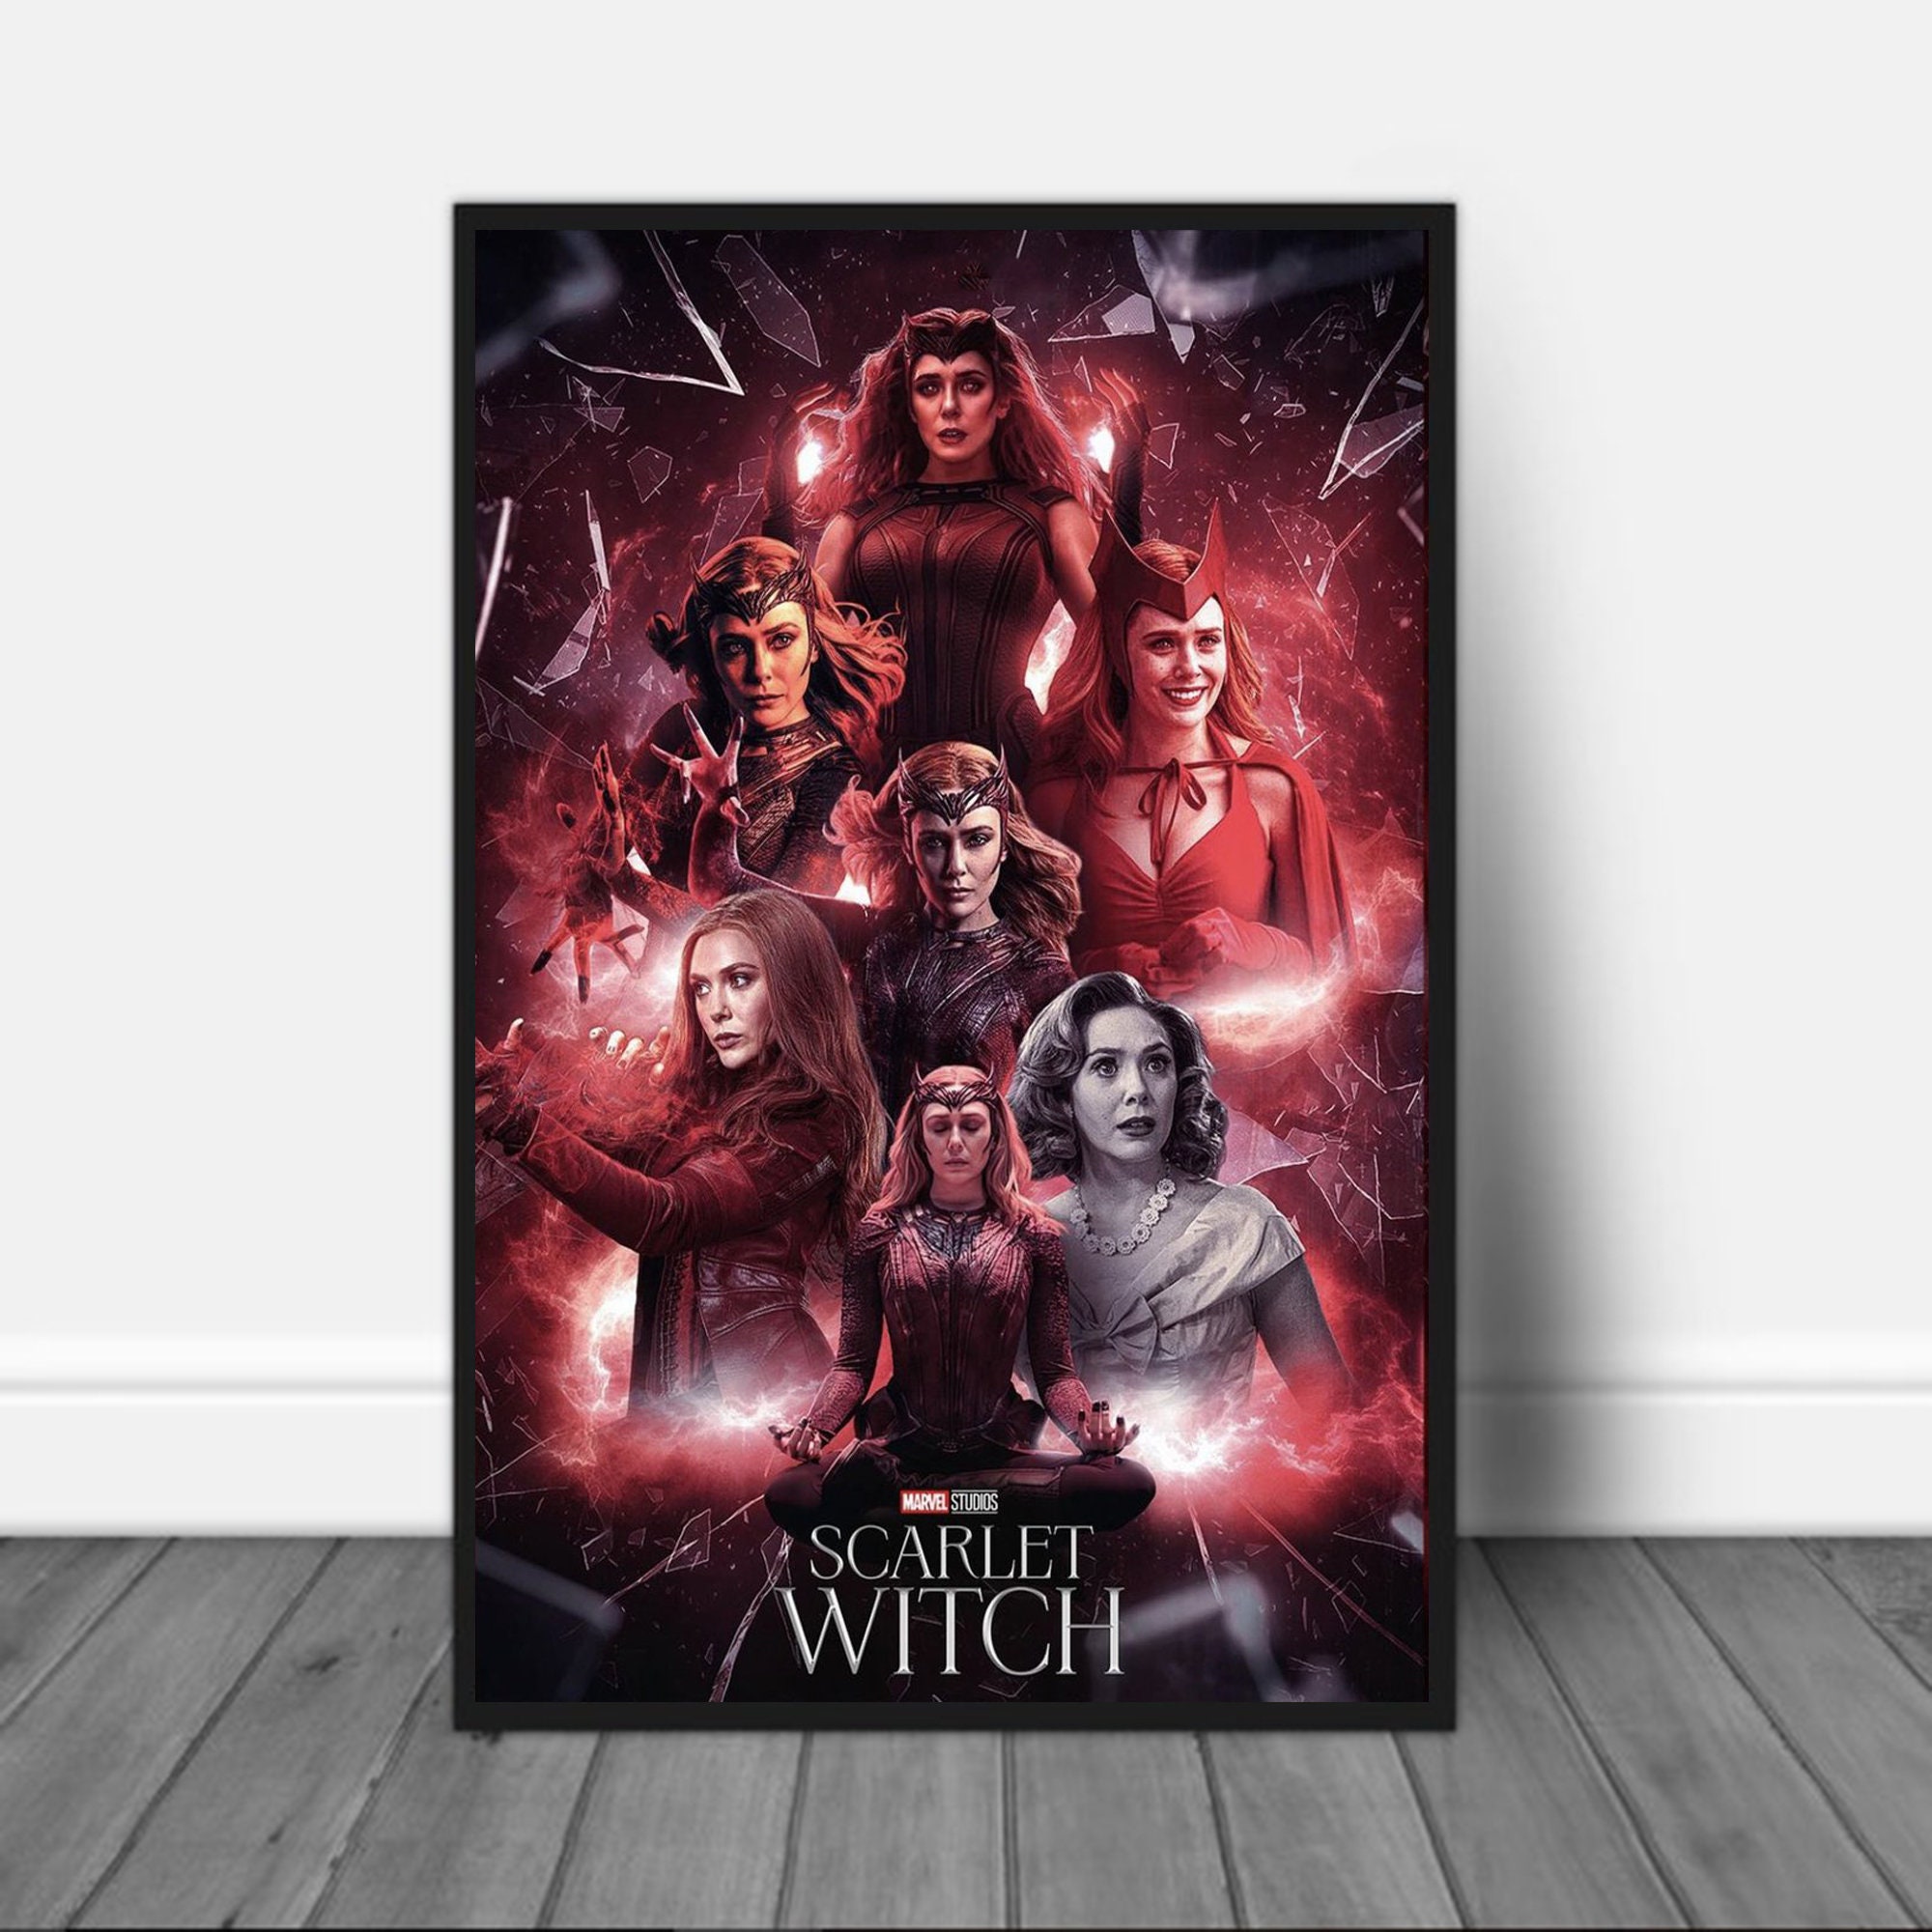 Scarlet Witch 2022 Dr Strange 2 Multiverse Of Madness Poster